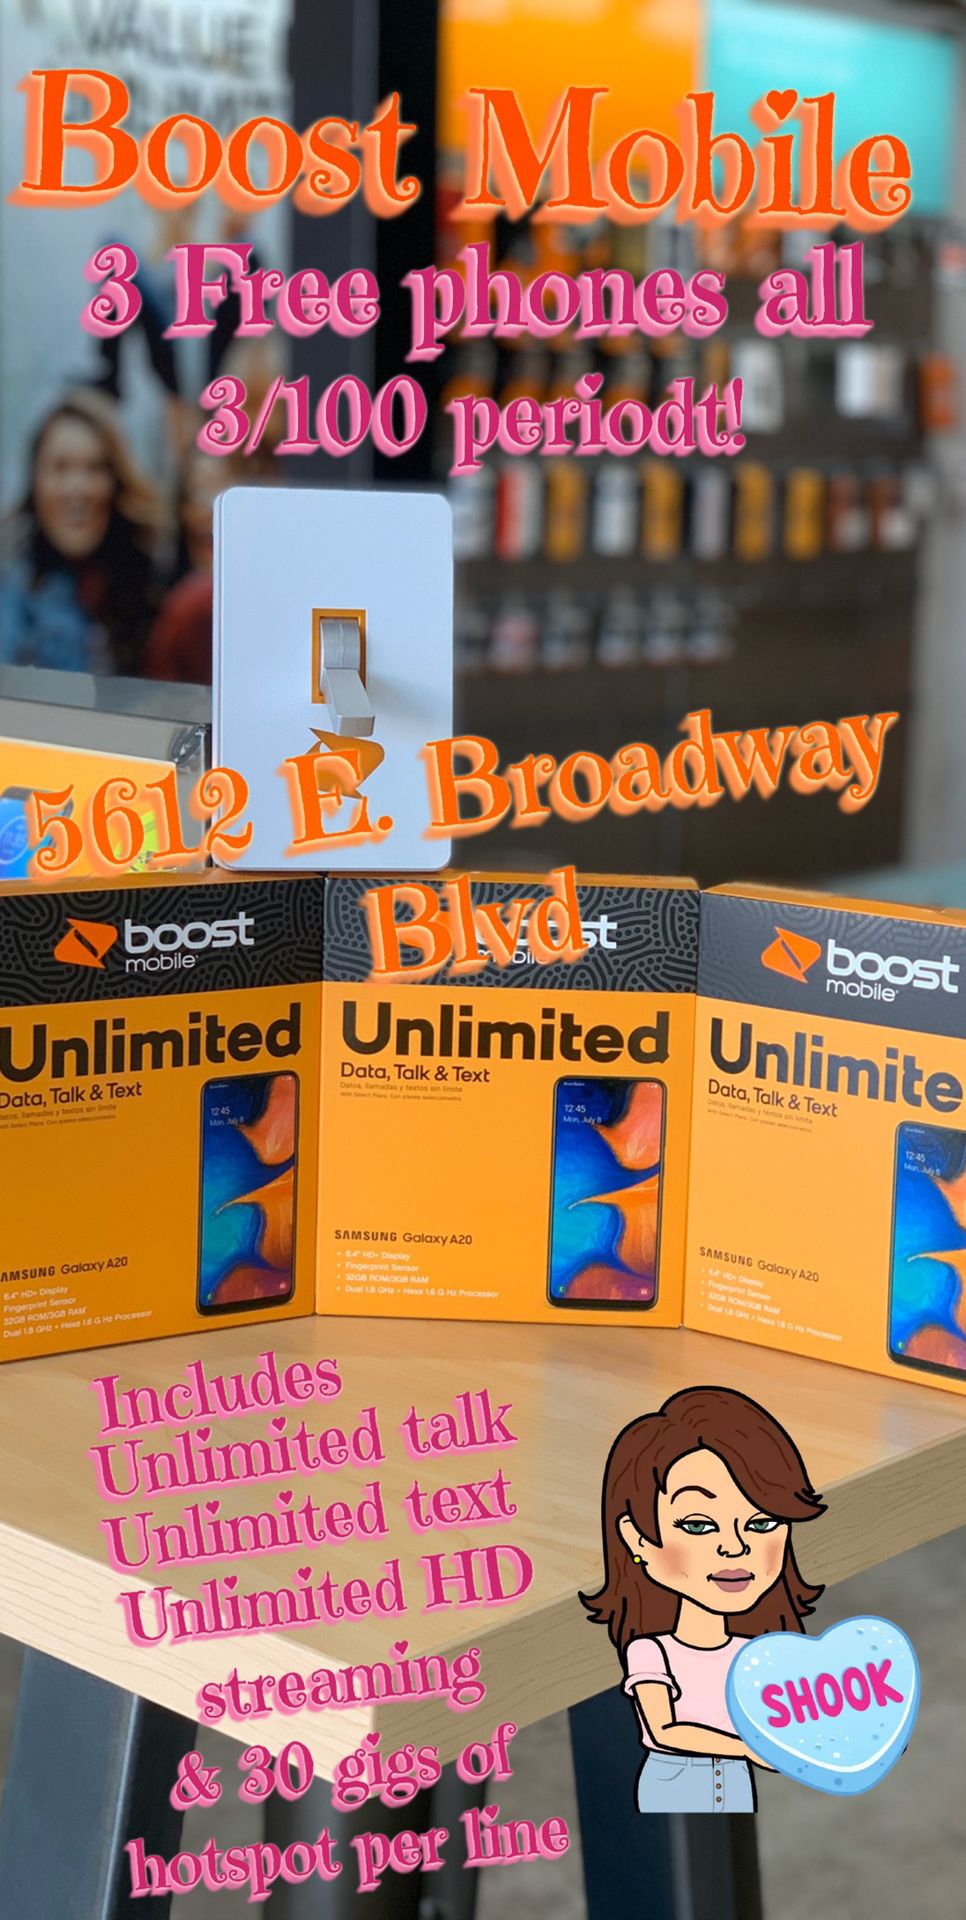 Boost Mobile Free Samsung A20 when you switch today 5612 E. Broadway Blvd